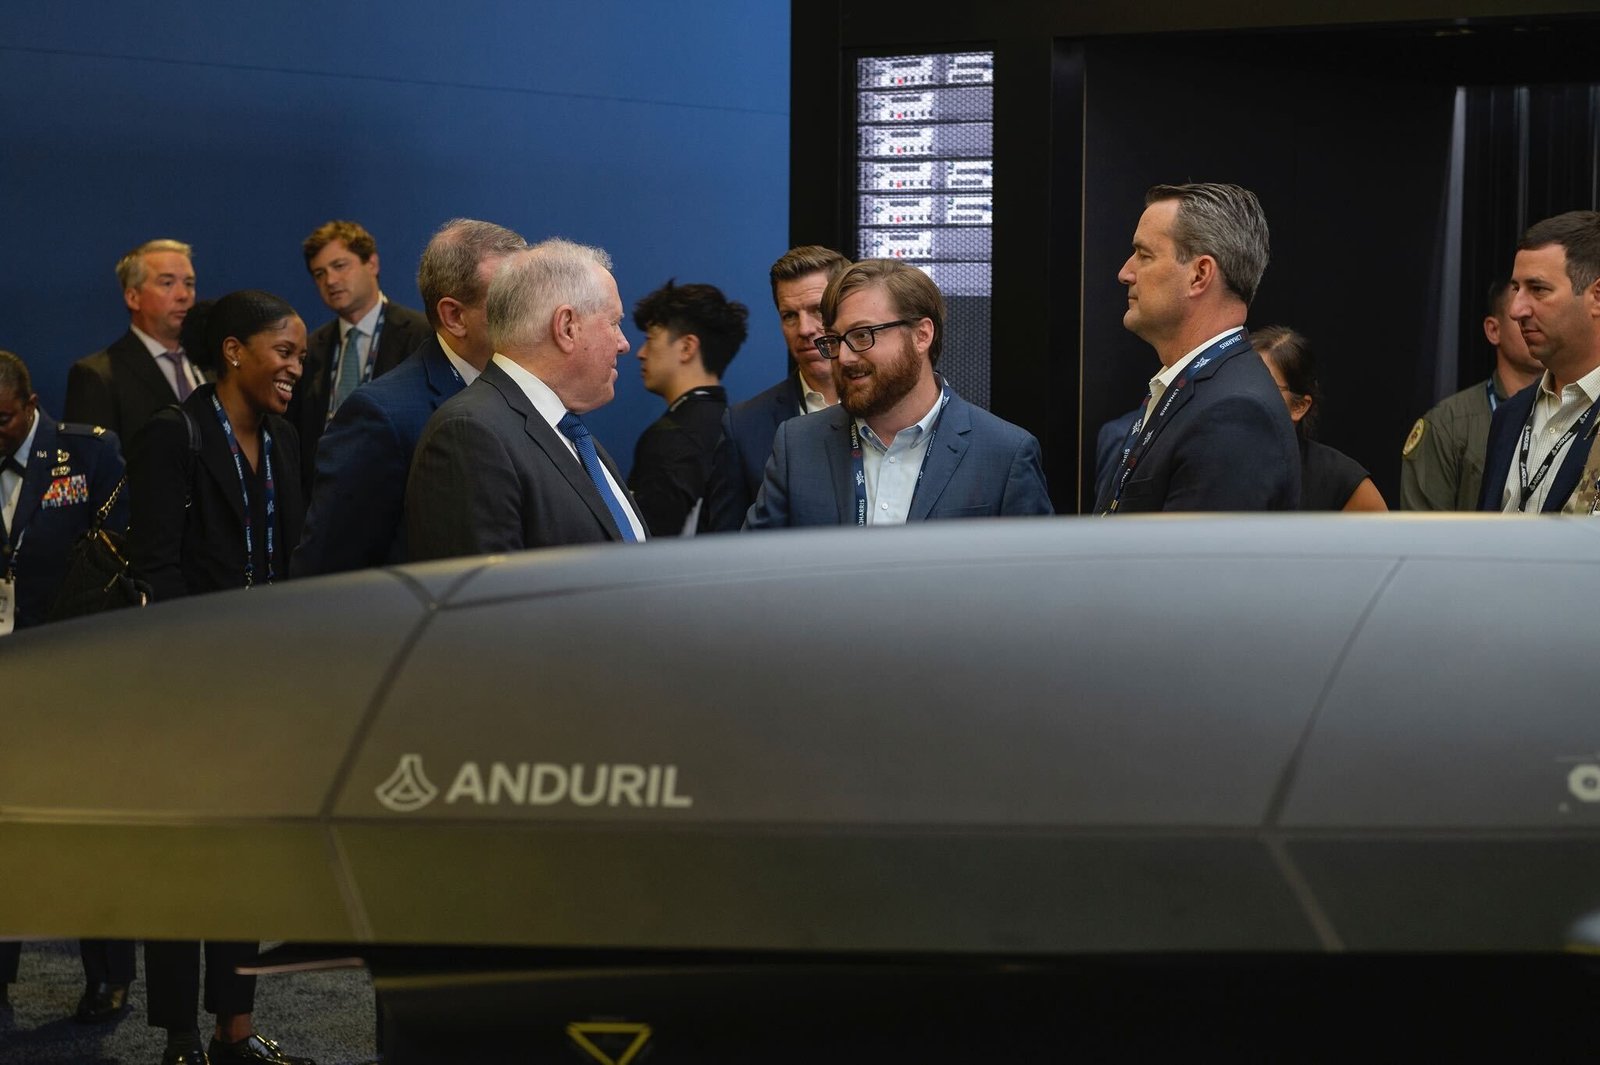 Anduril invests $75 million in Mississippi rocket motor facility